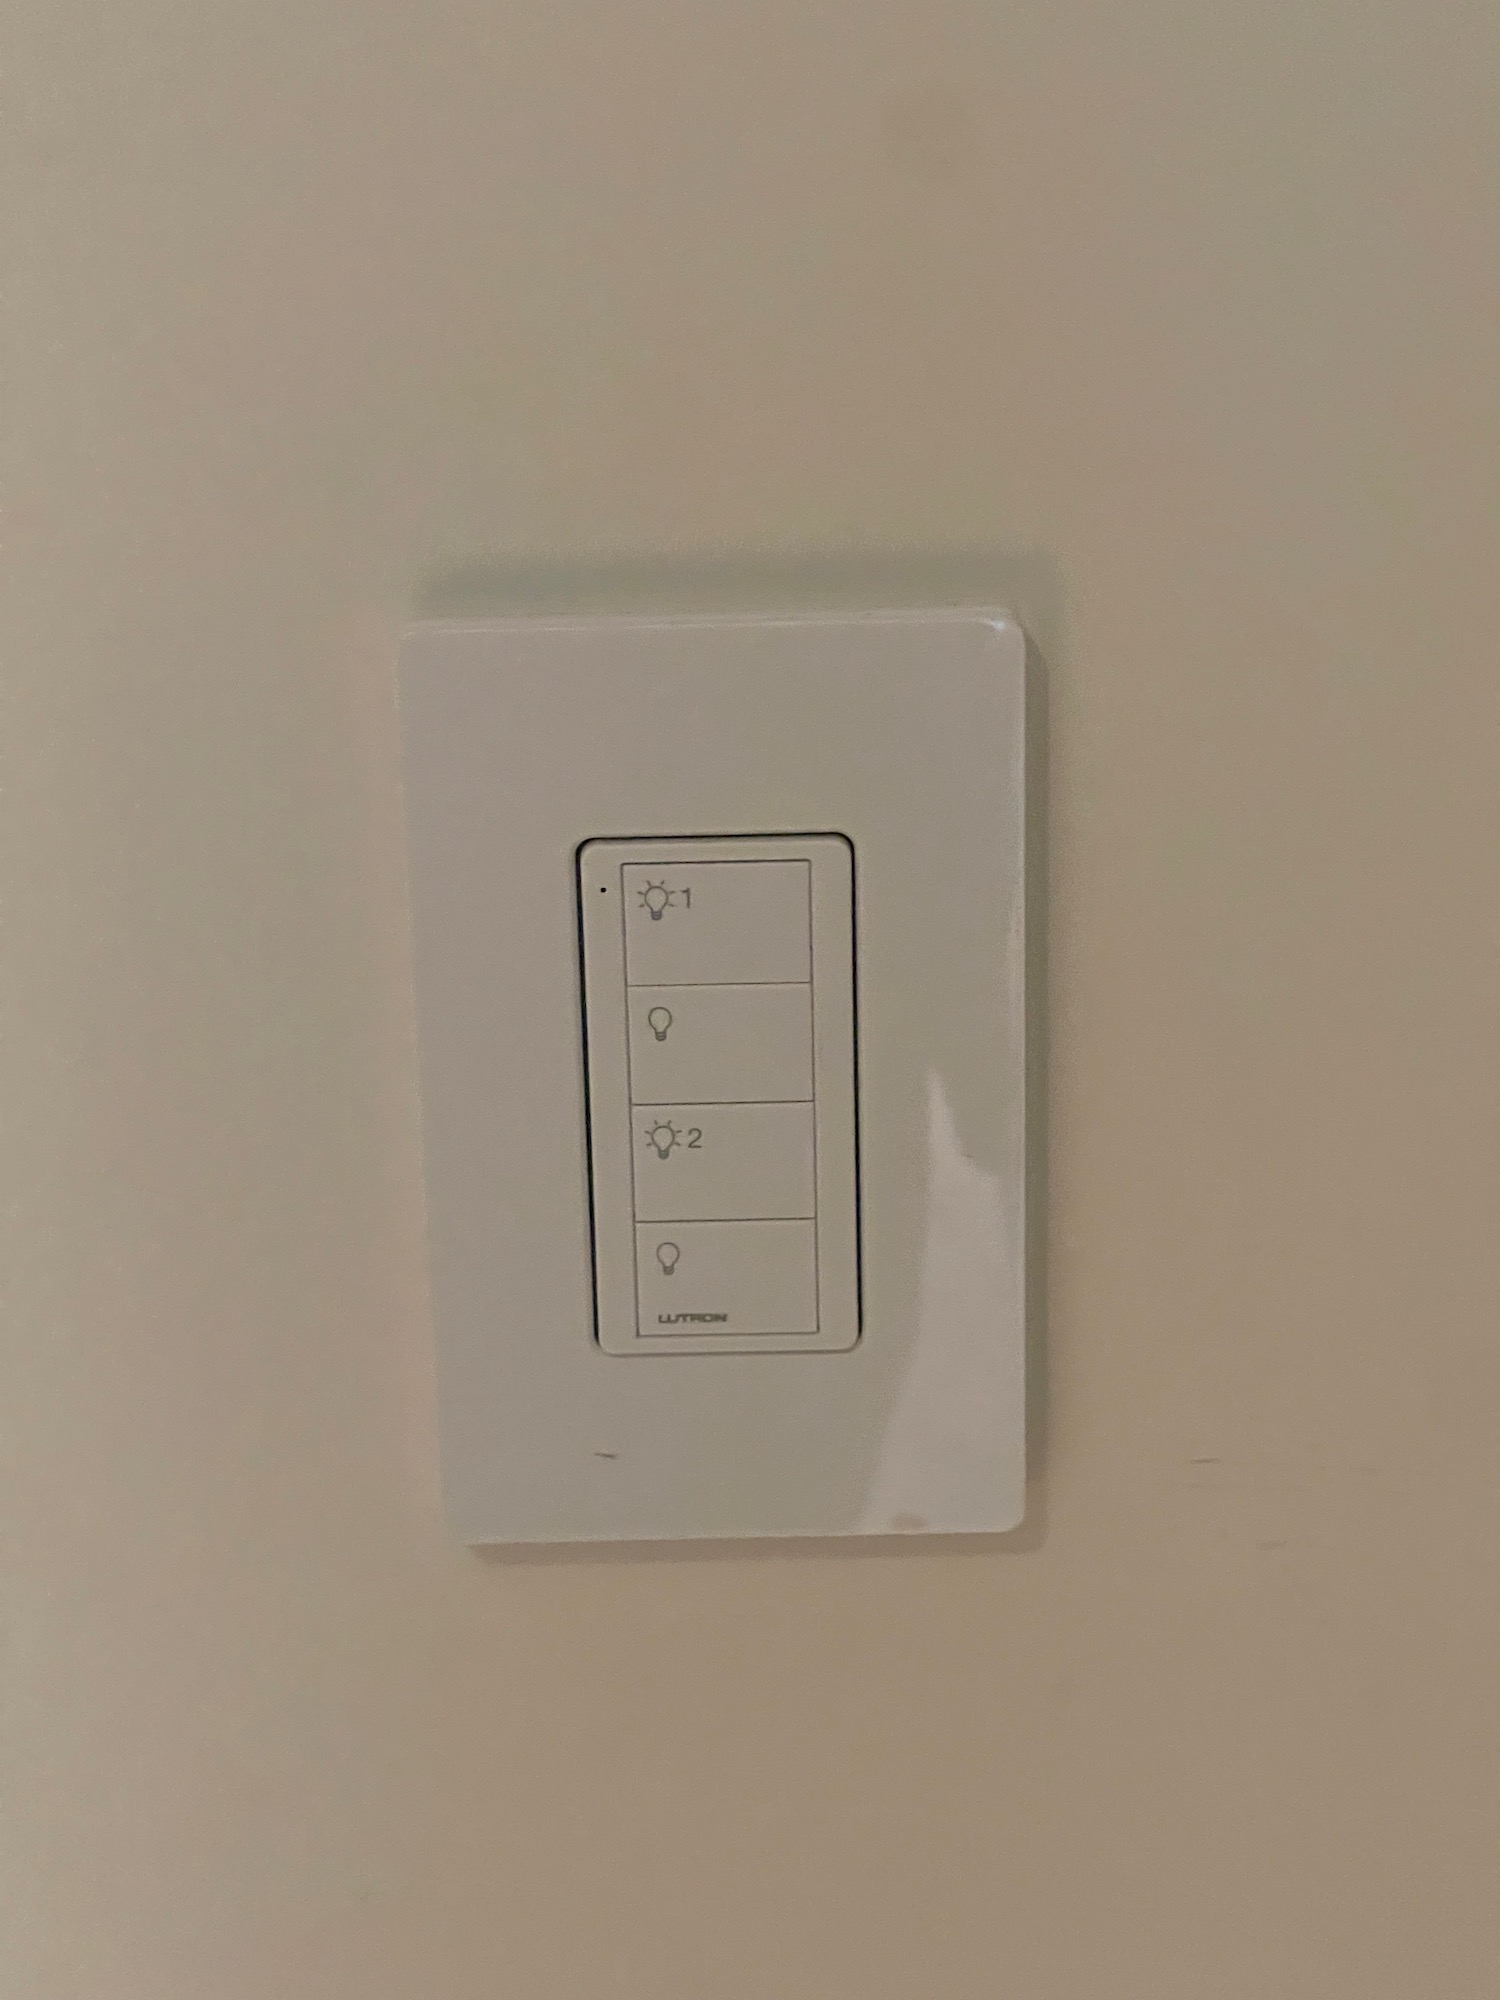 a white rectangular wall switch with buttons